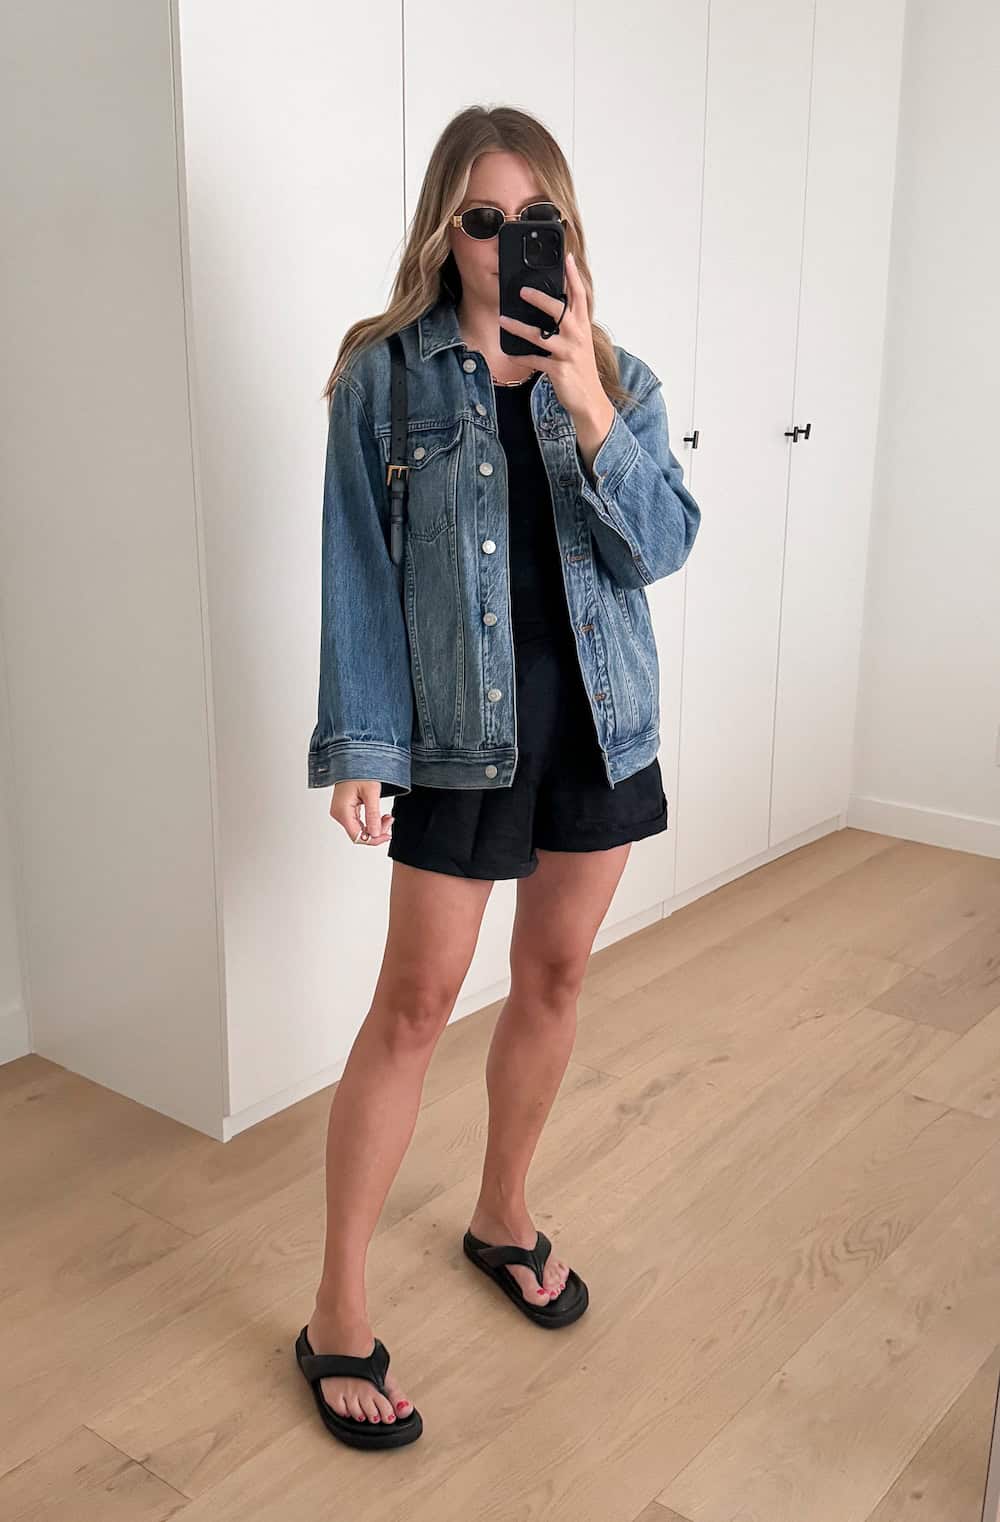 Christal wearing black shorts and a black tank top with a denim jacket and sandals.